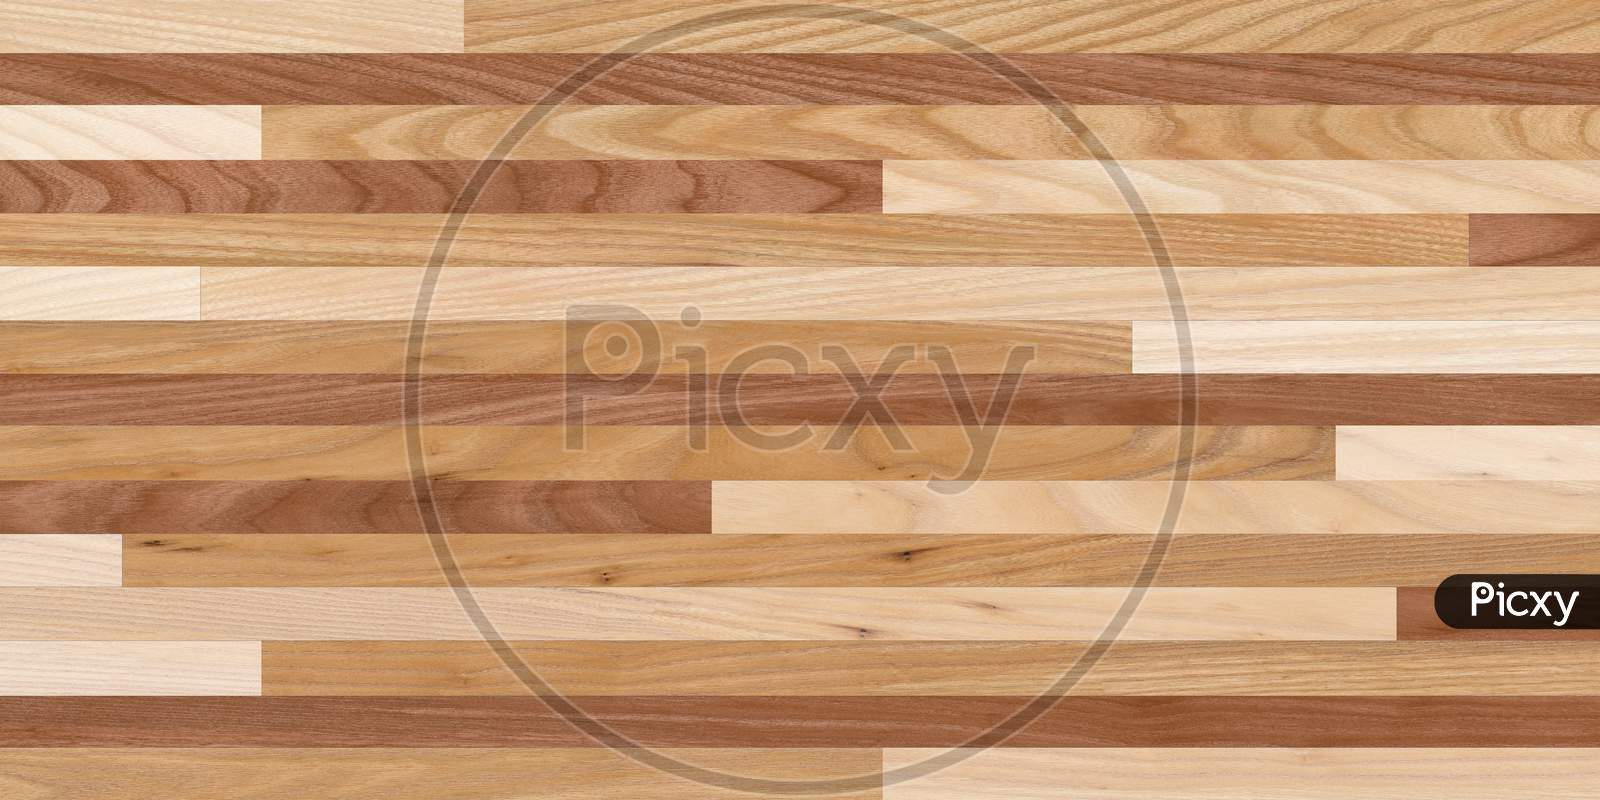 Wooden Striped Decorative Floor And Wall Pattern Tile.